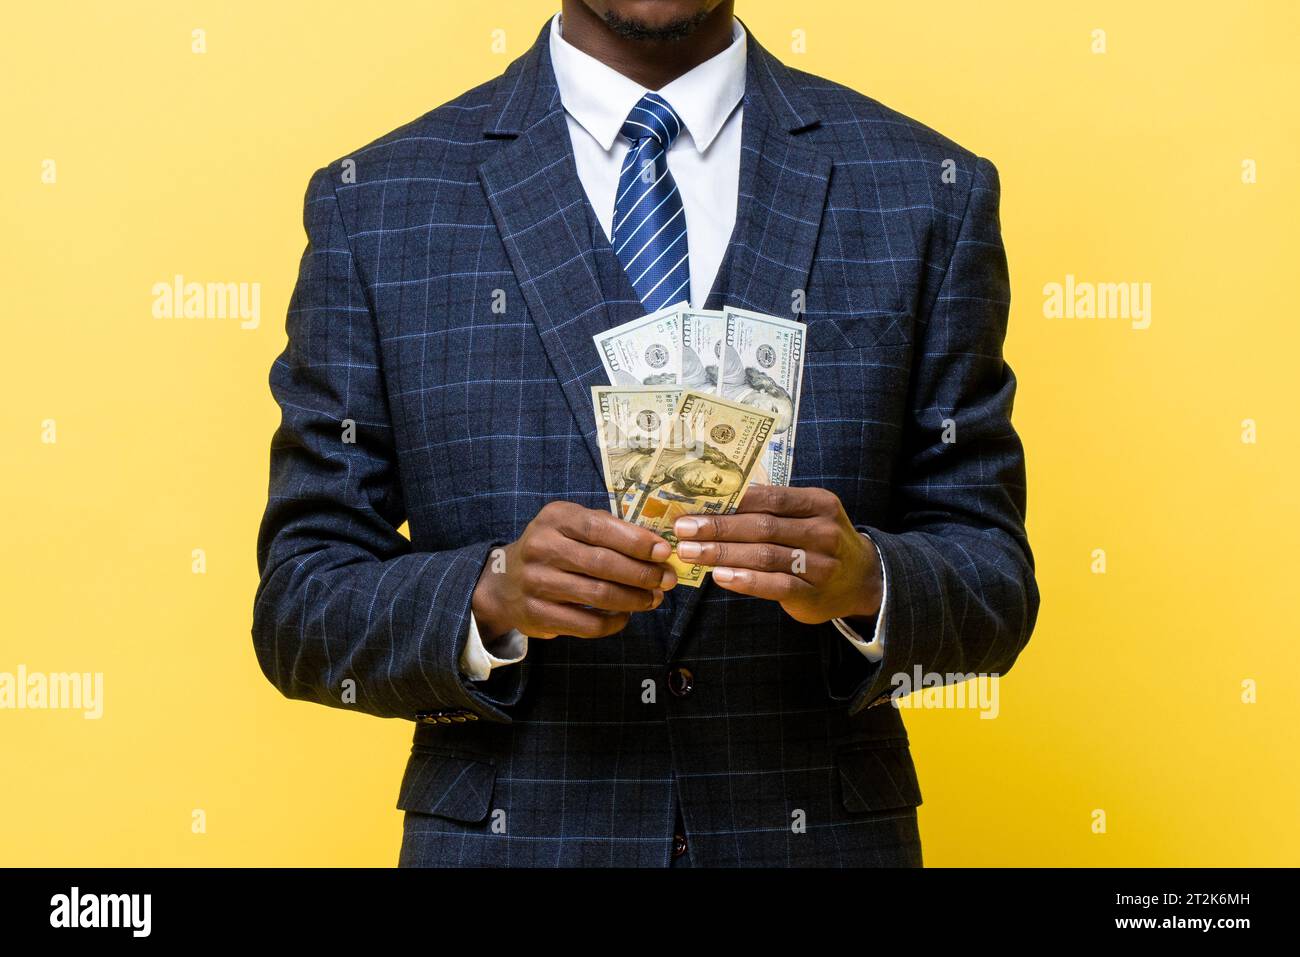 African man in business suit holding money Stock Photo